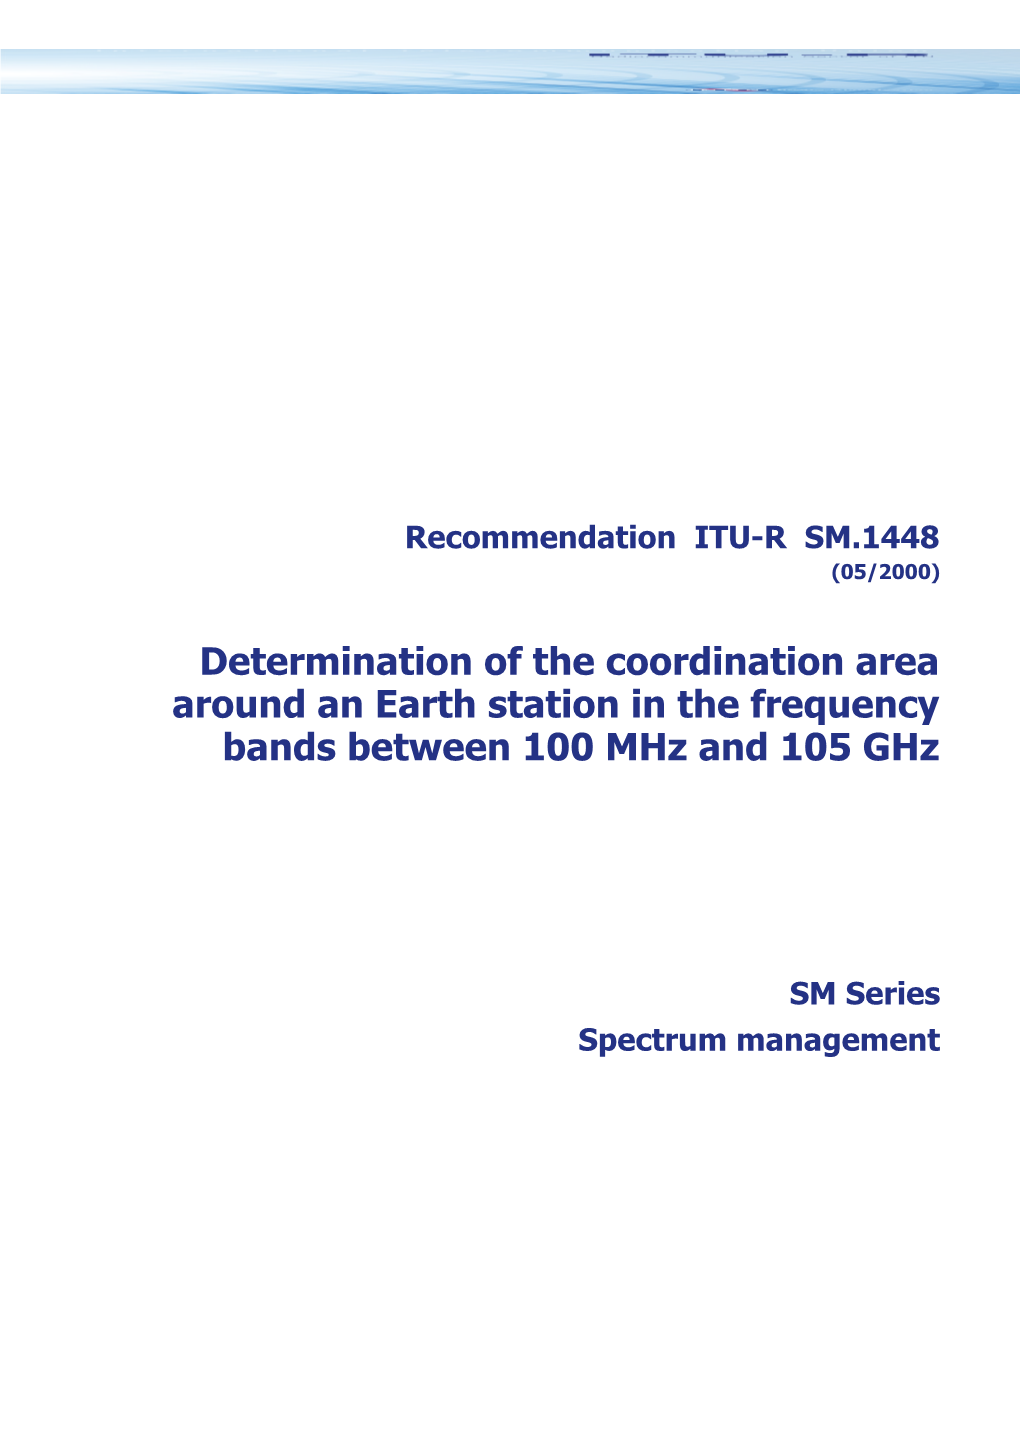 SM.1448 - Determination of the Coordination Area Around an Earth Station in the Frequency